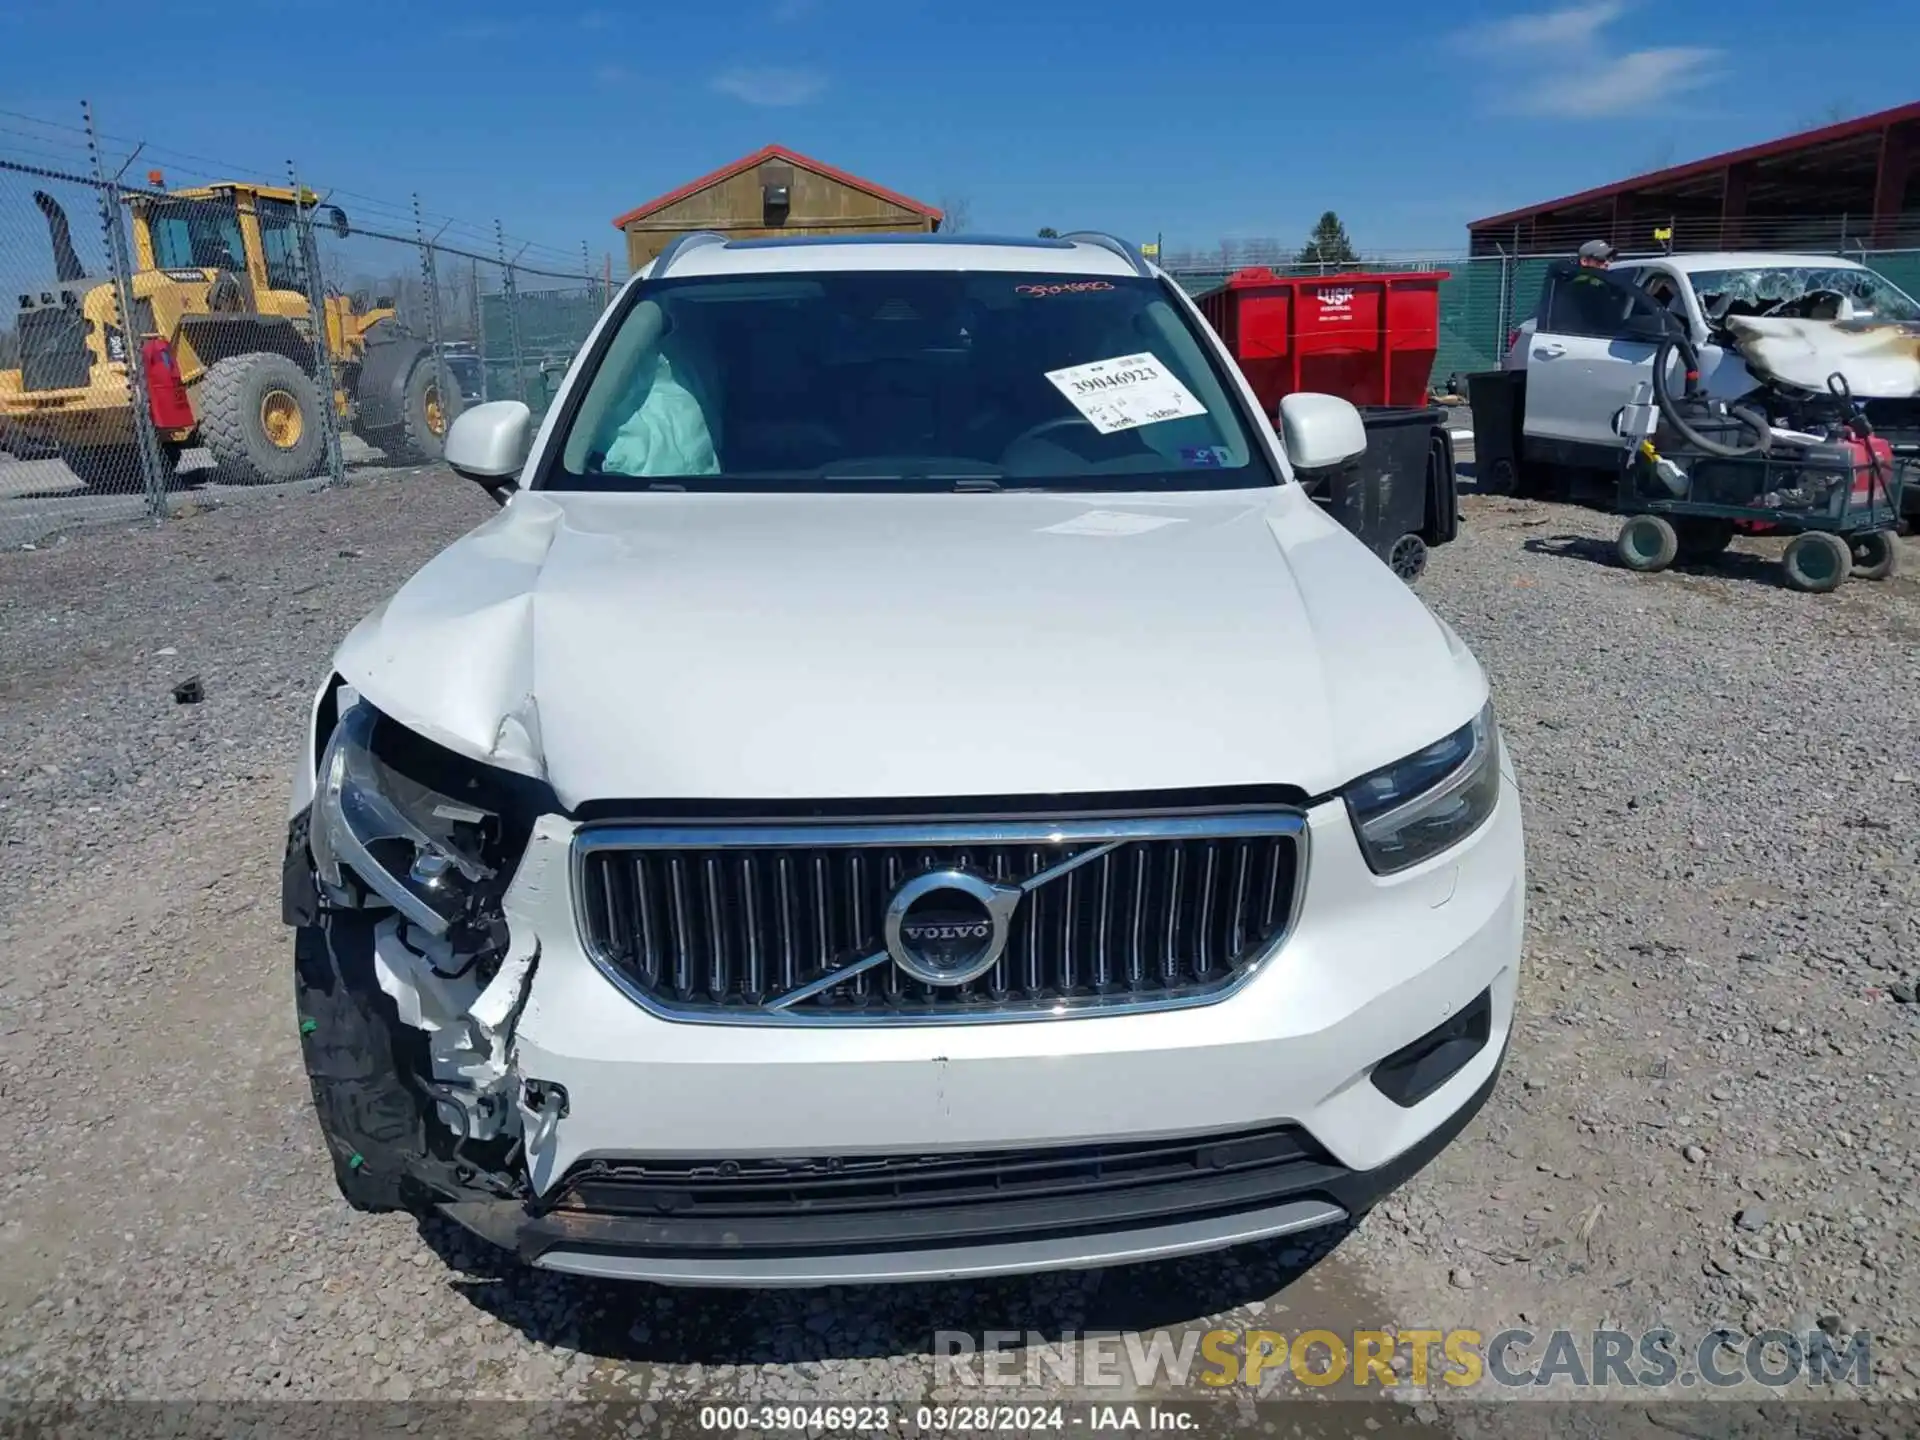 12 Photograph of a damaged car YV4162ULXM2436221 VOLVO XC40 2021